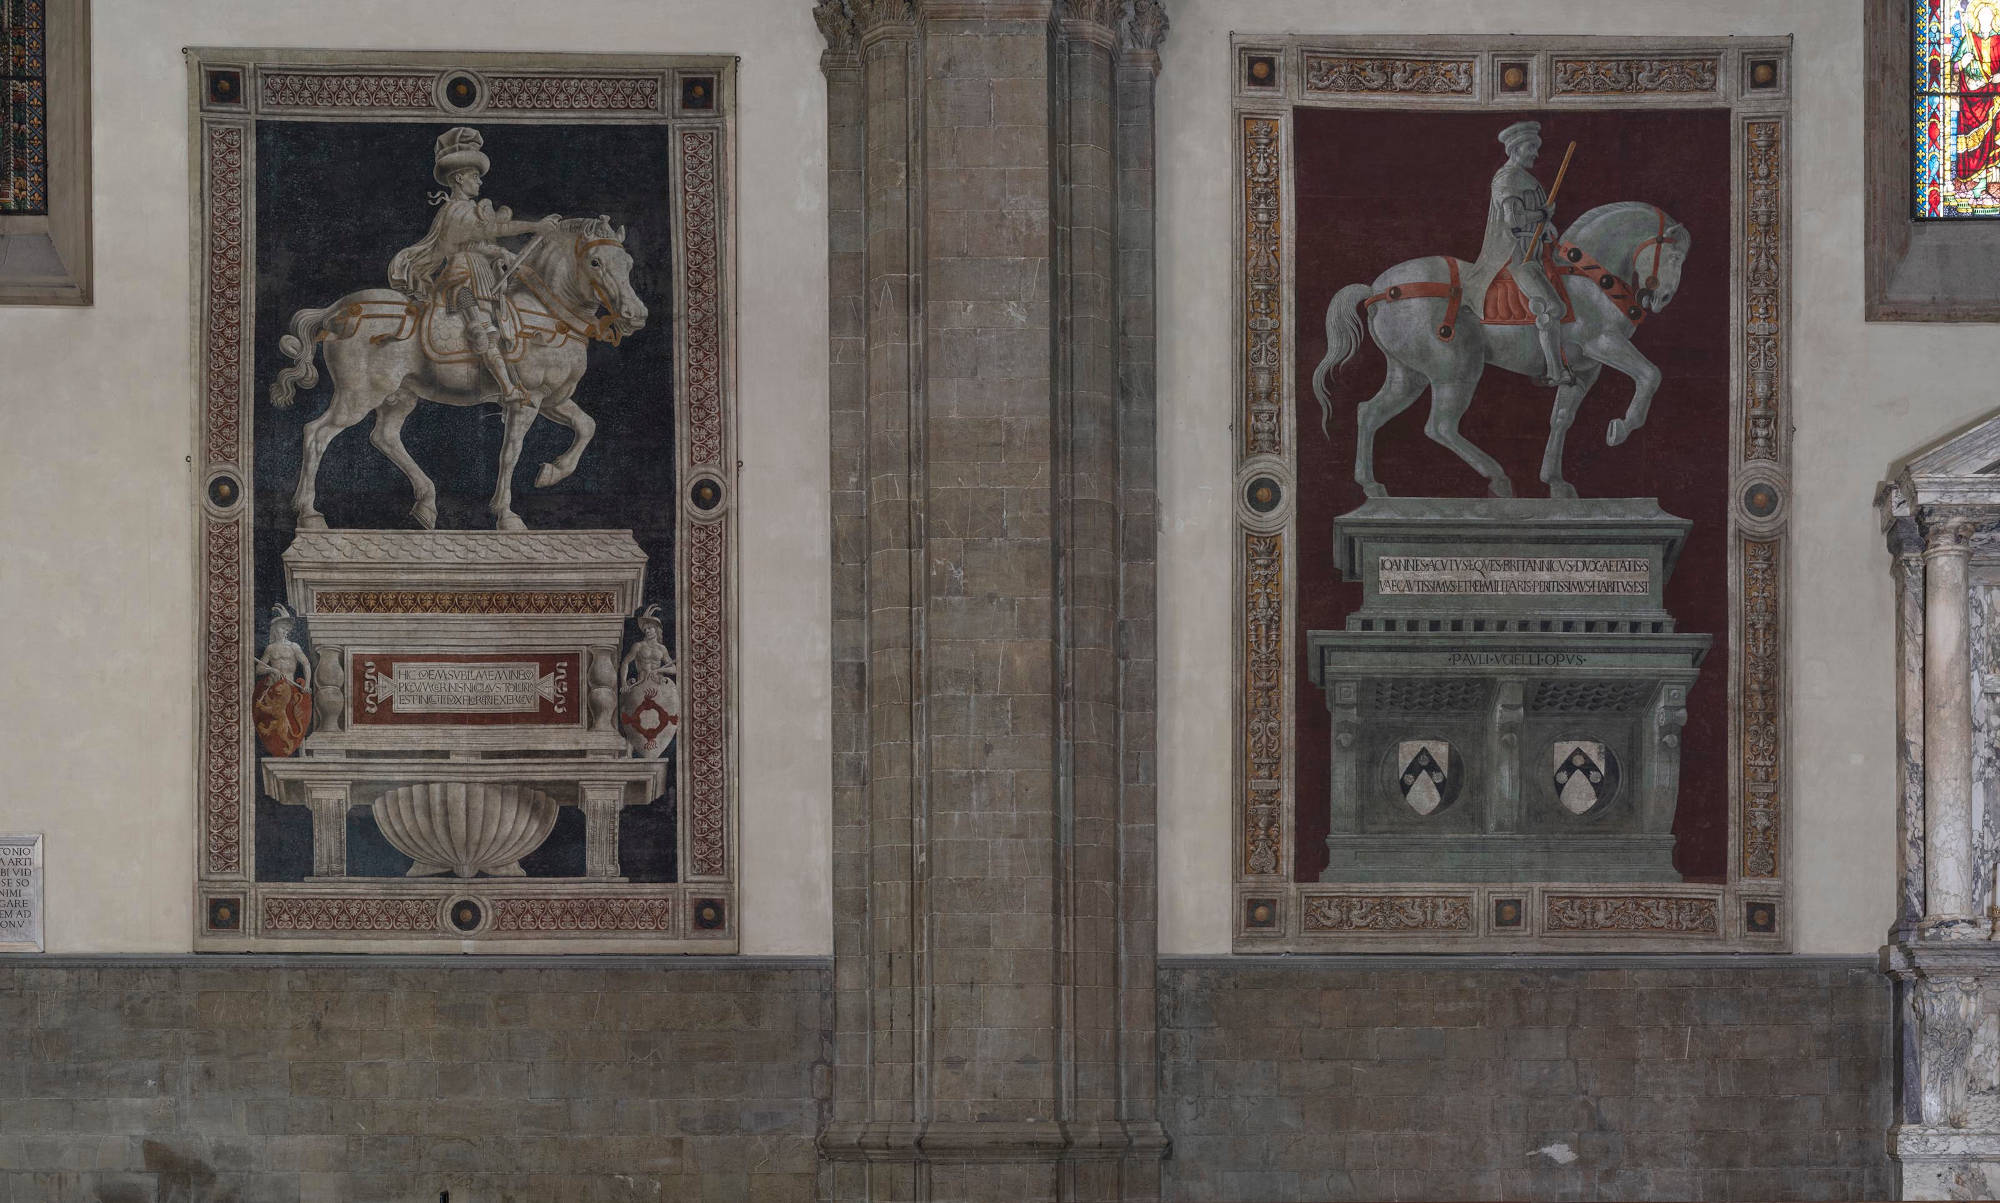 Florence, restoration of frescoes featuring Giovanni Acuto and Niccolò da Tolentino begins in the Duomo 